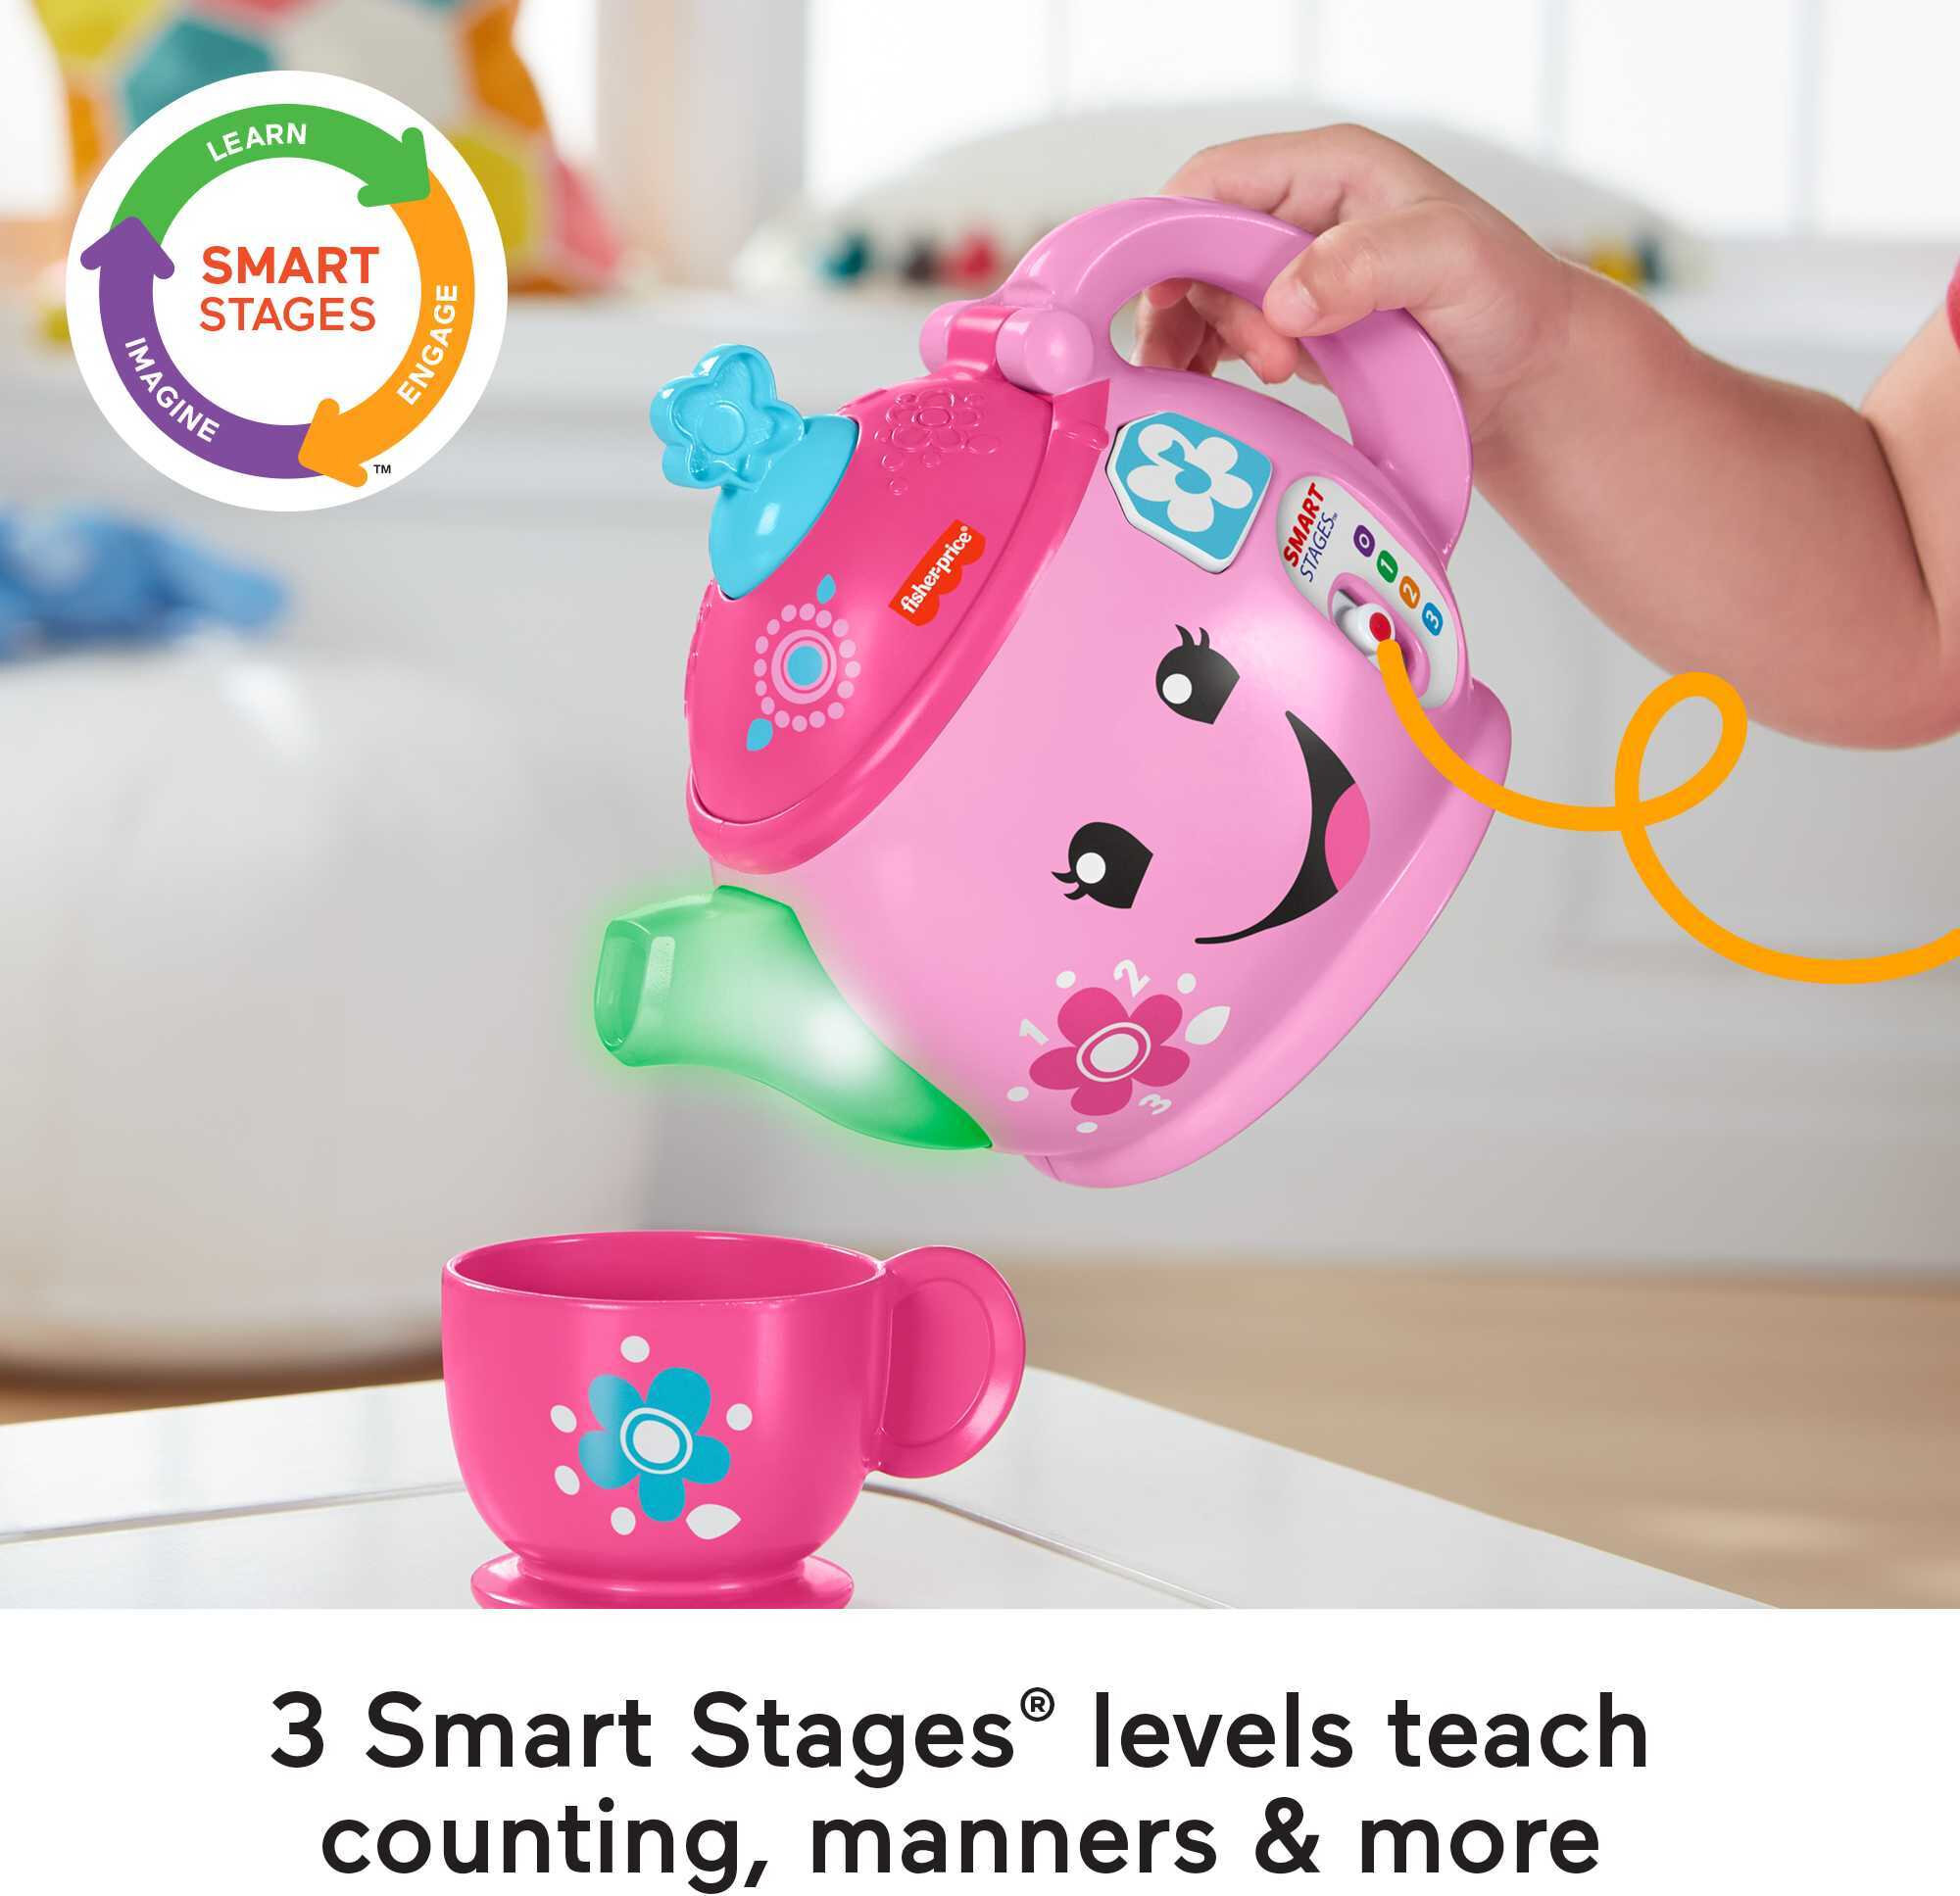 Fisher-Price Laugh & Learn Sweet Manners Tea Set Interactive Toddler Pretend Play, 11 Pieces - image 4 of 8